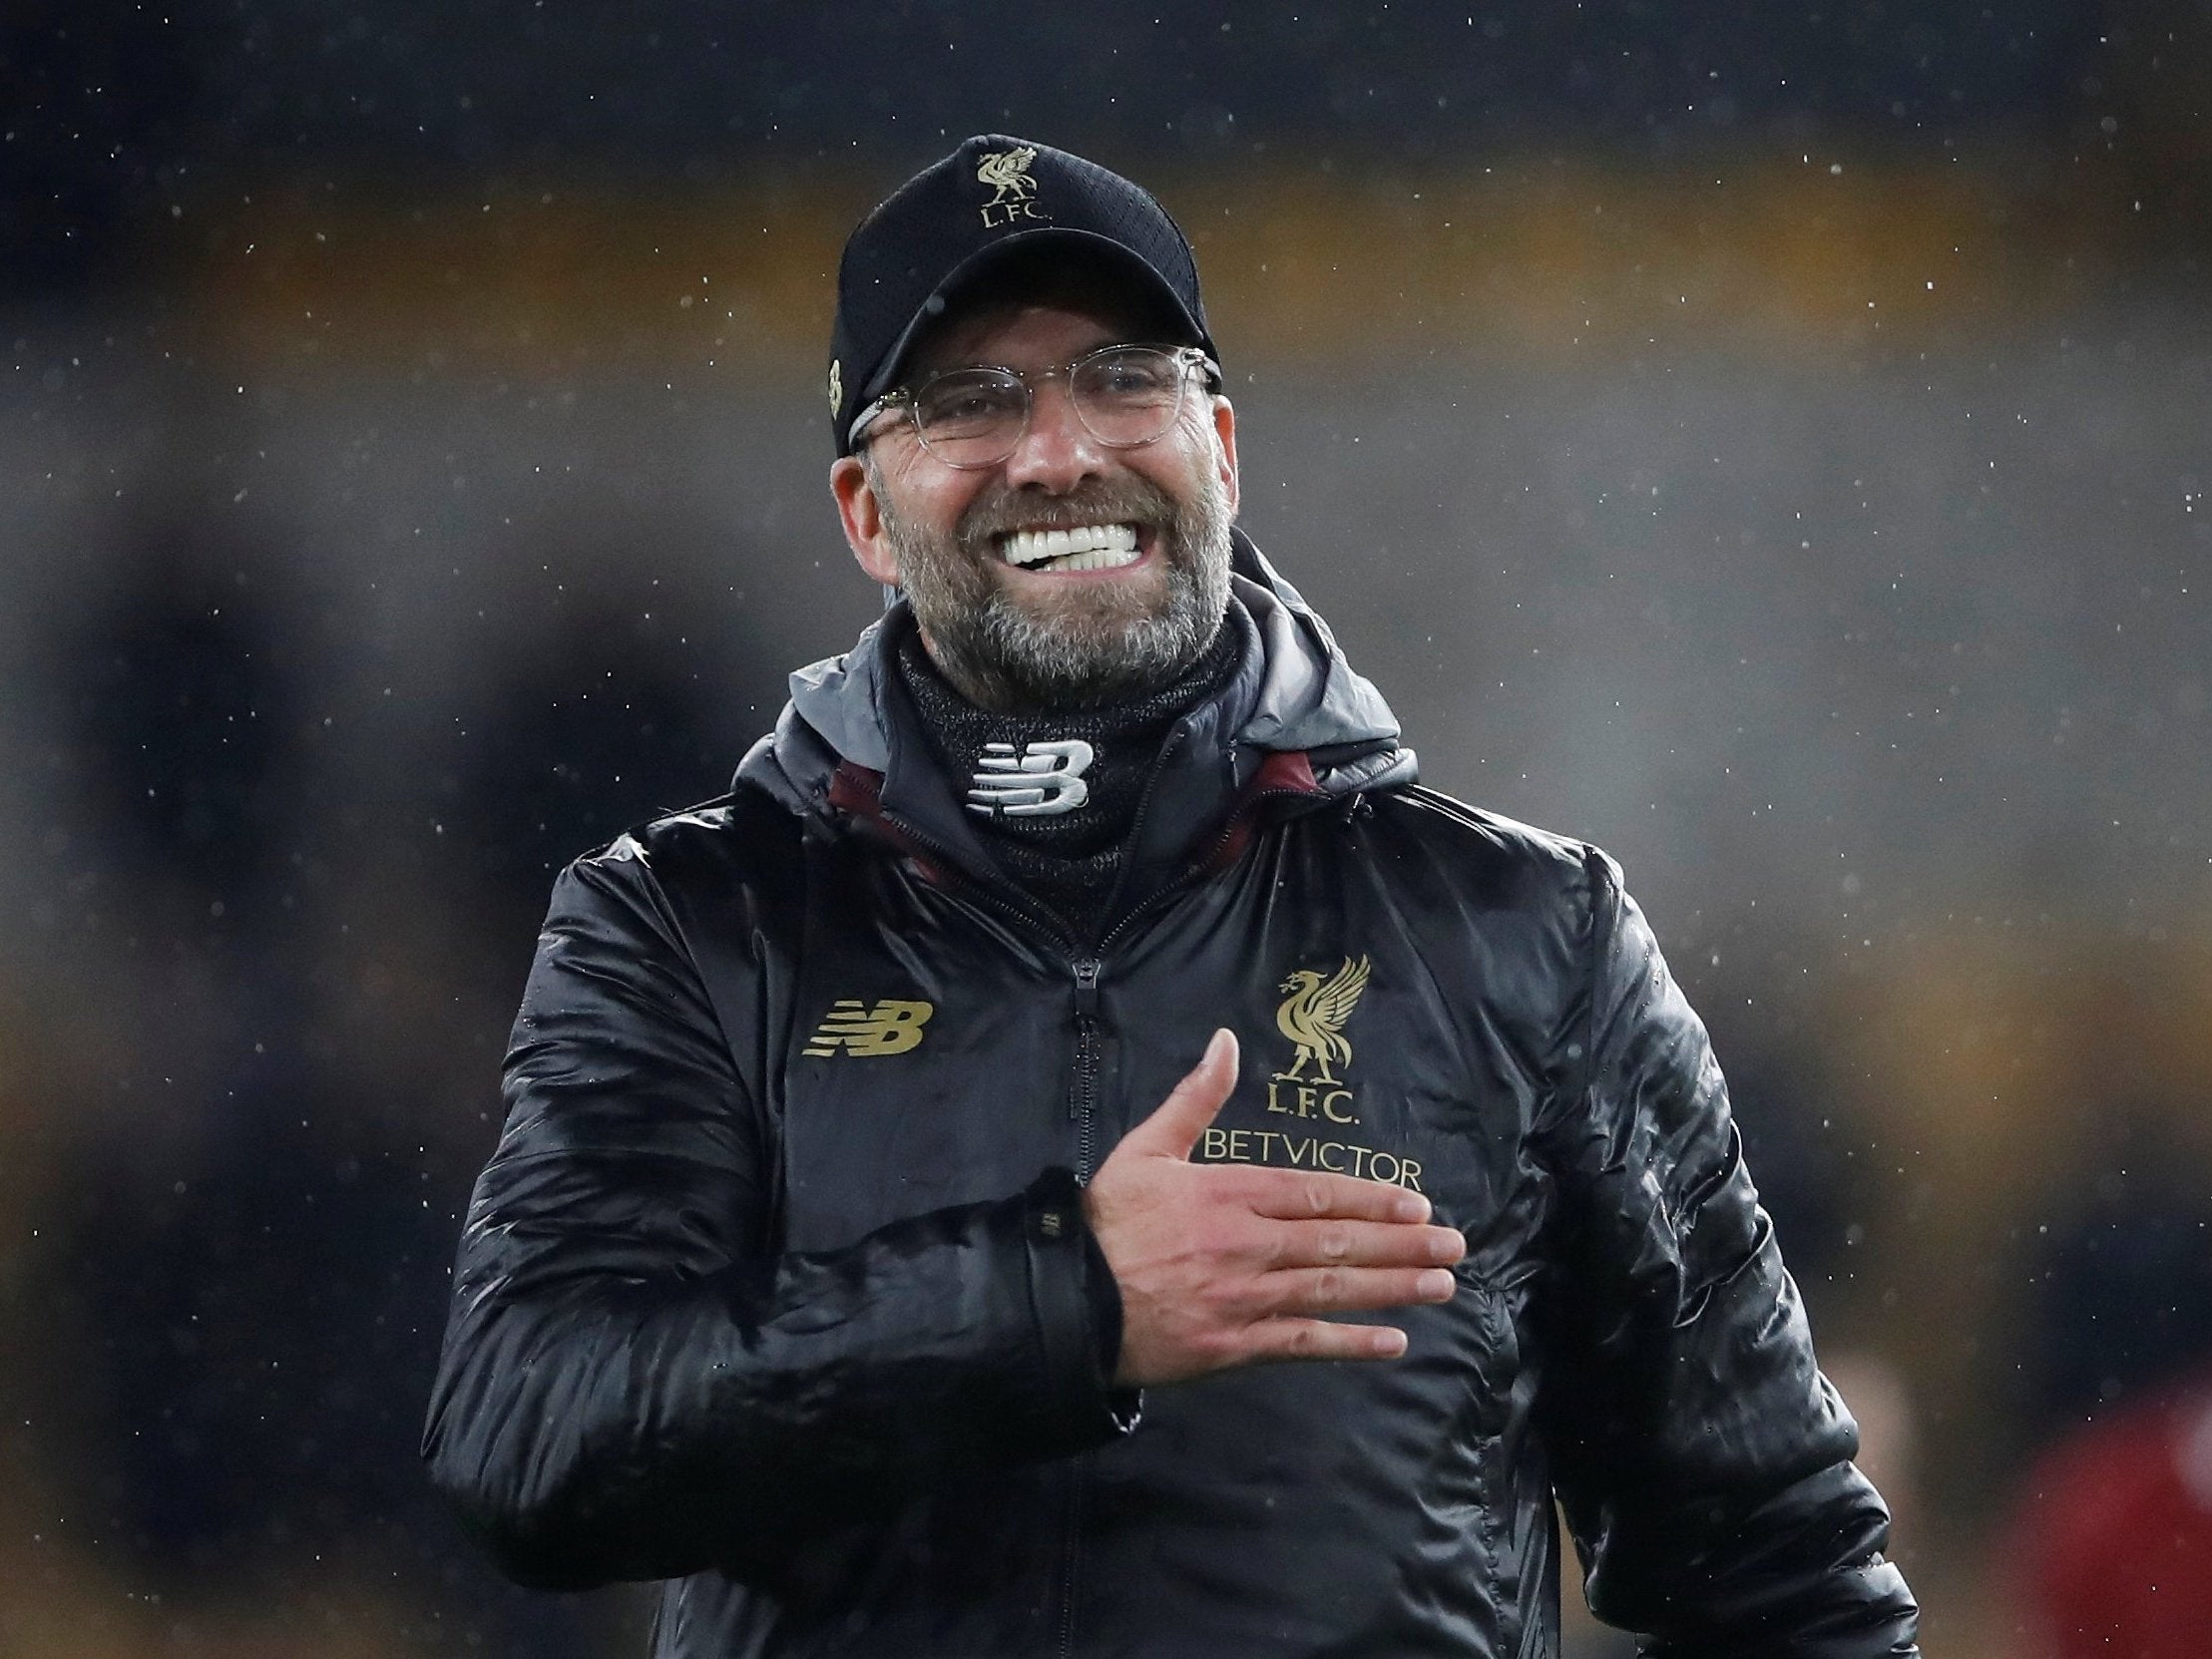 Jurgen Klopp is trying his best to downplay rising expectations of his Liverpool side